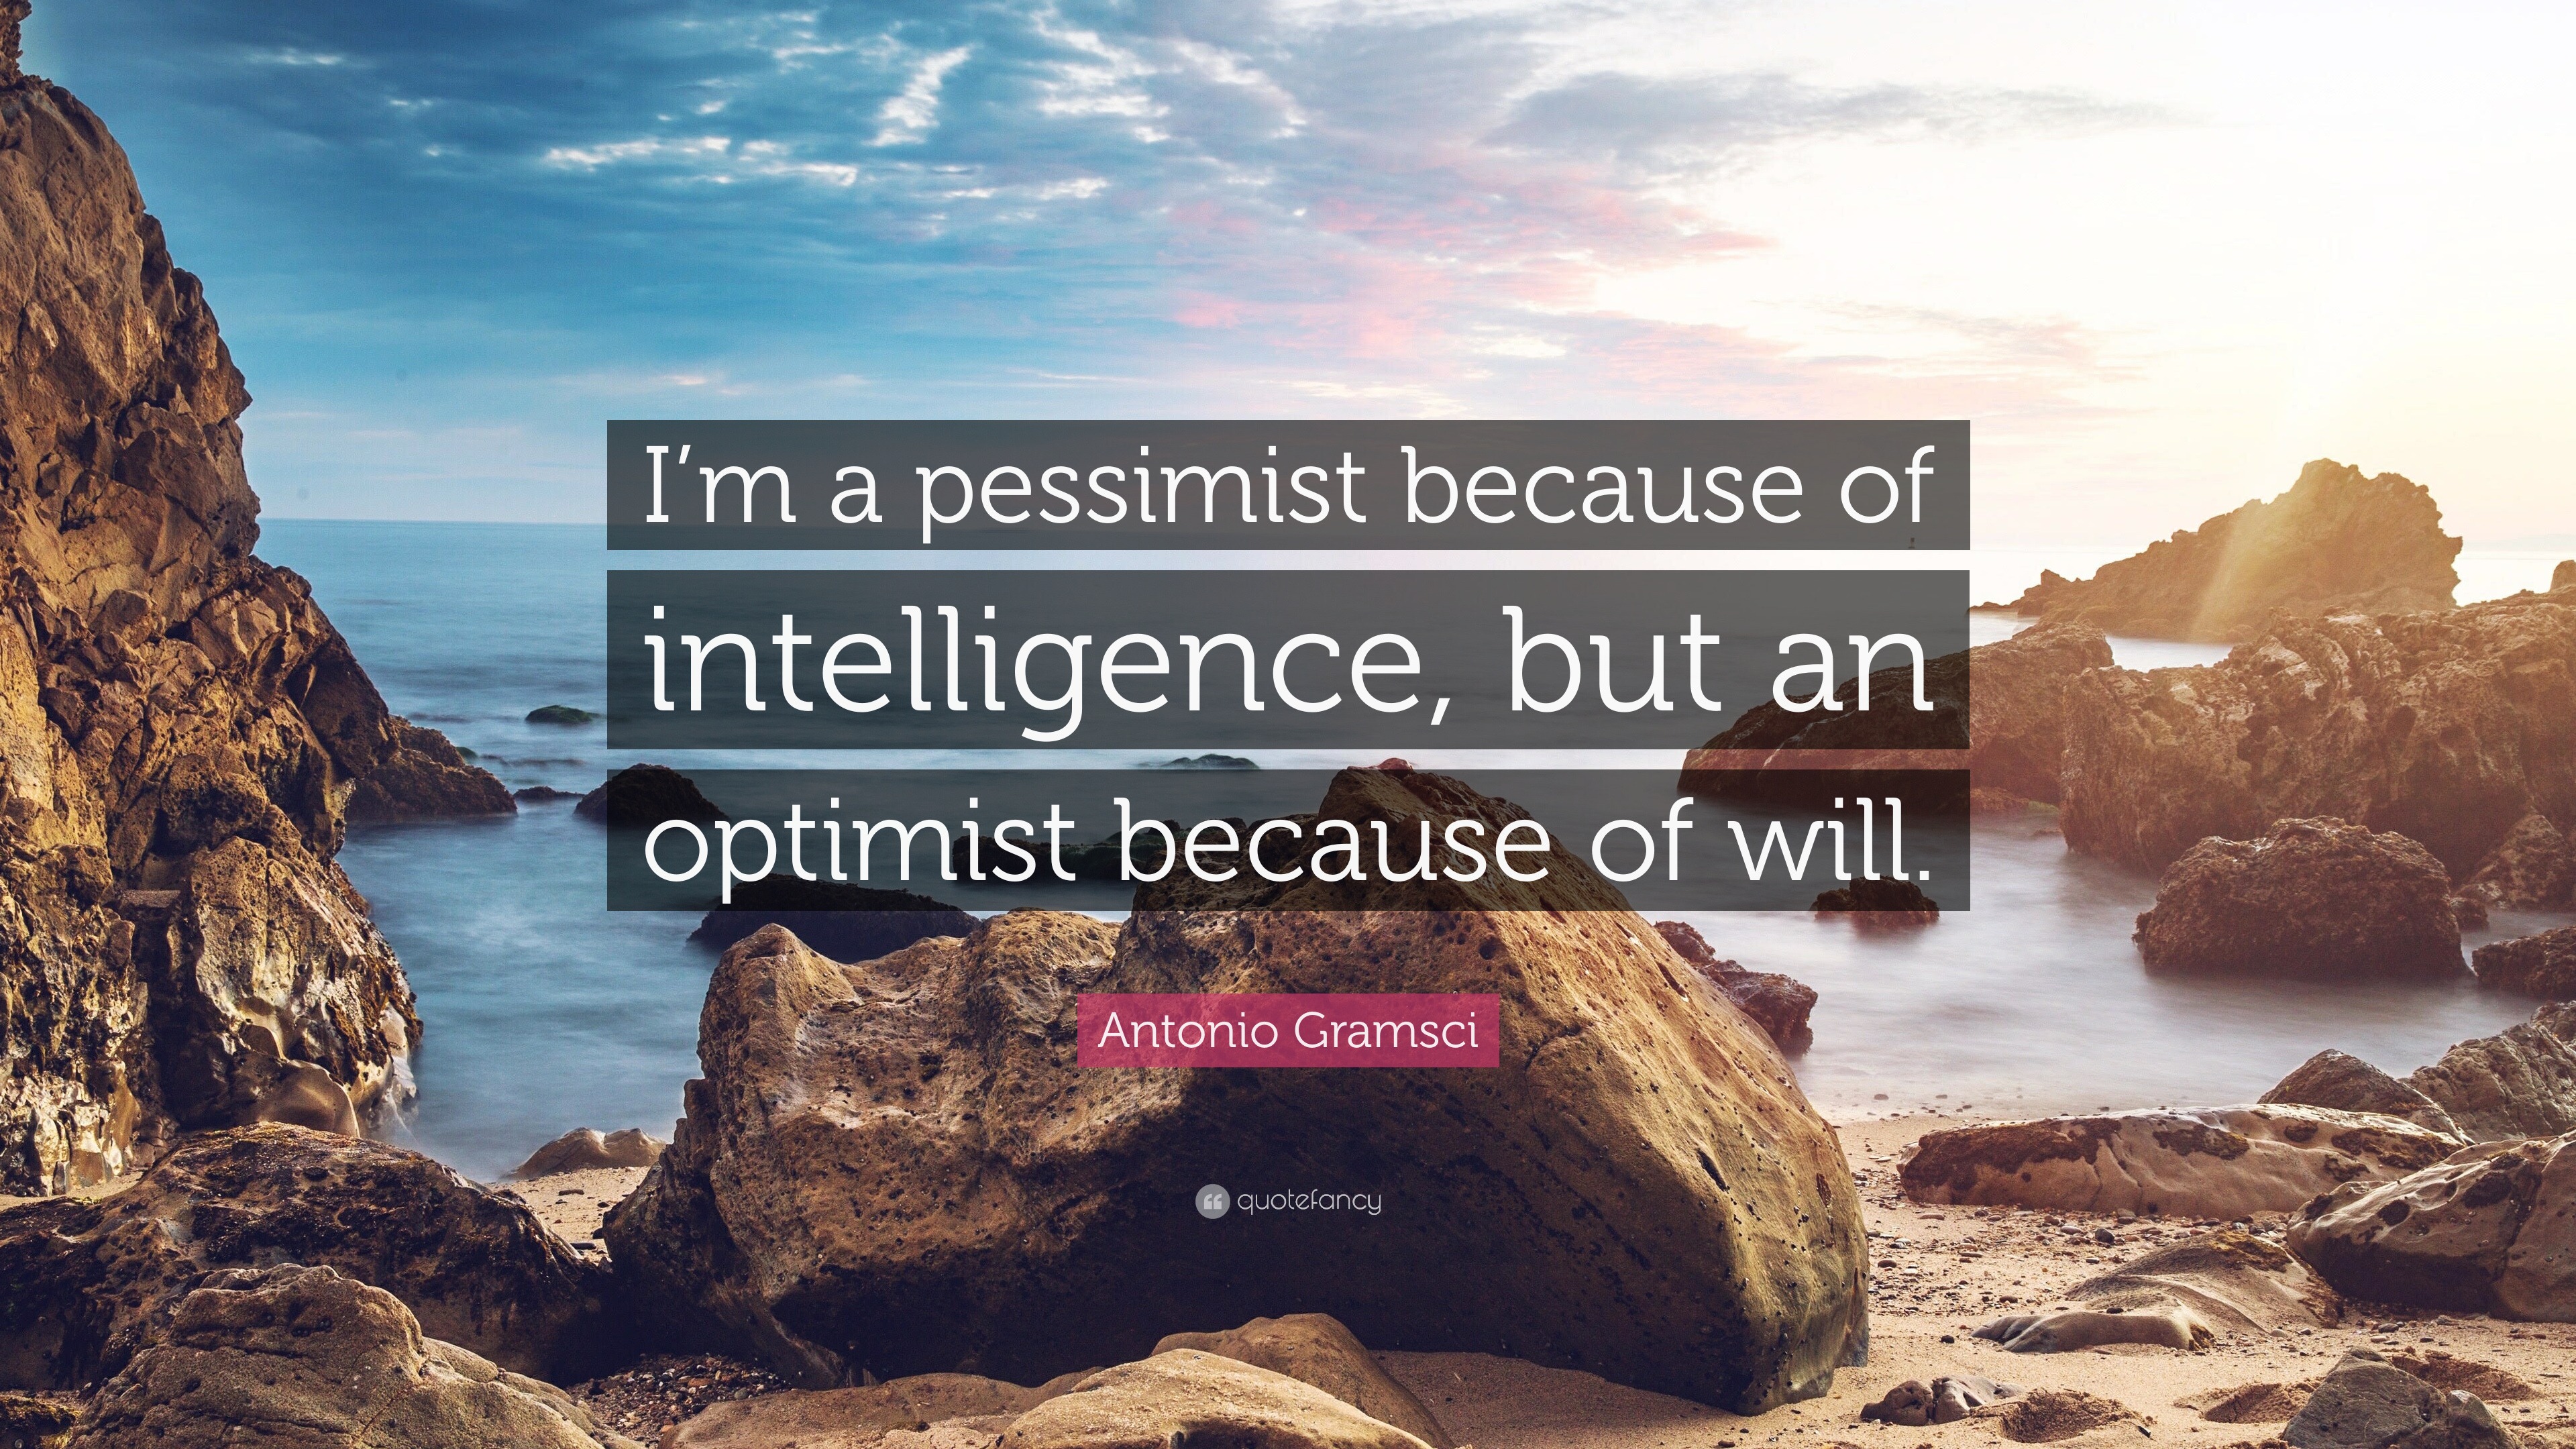 pessimism of the intellect optimism of the will